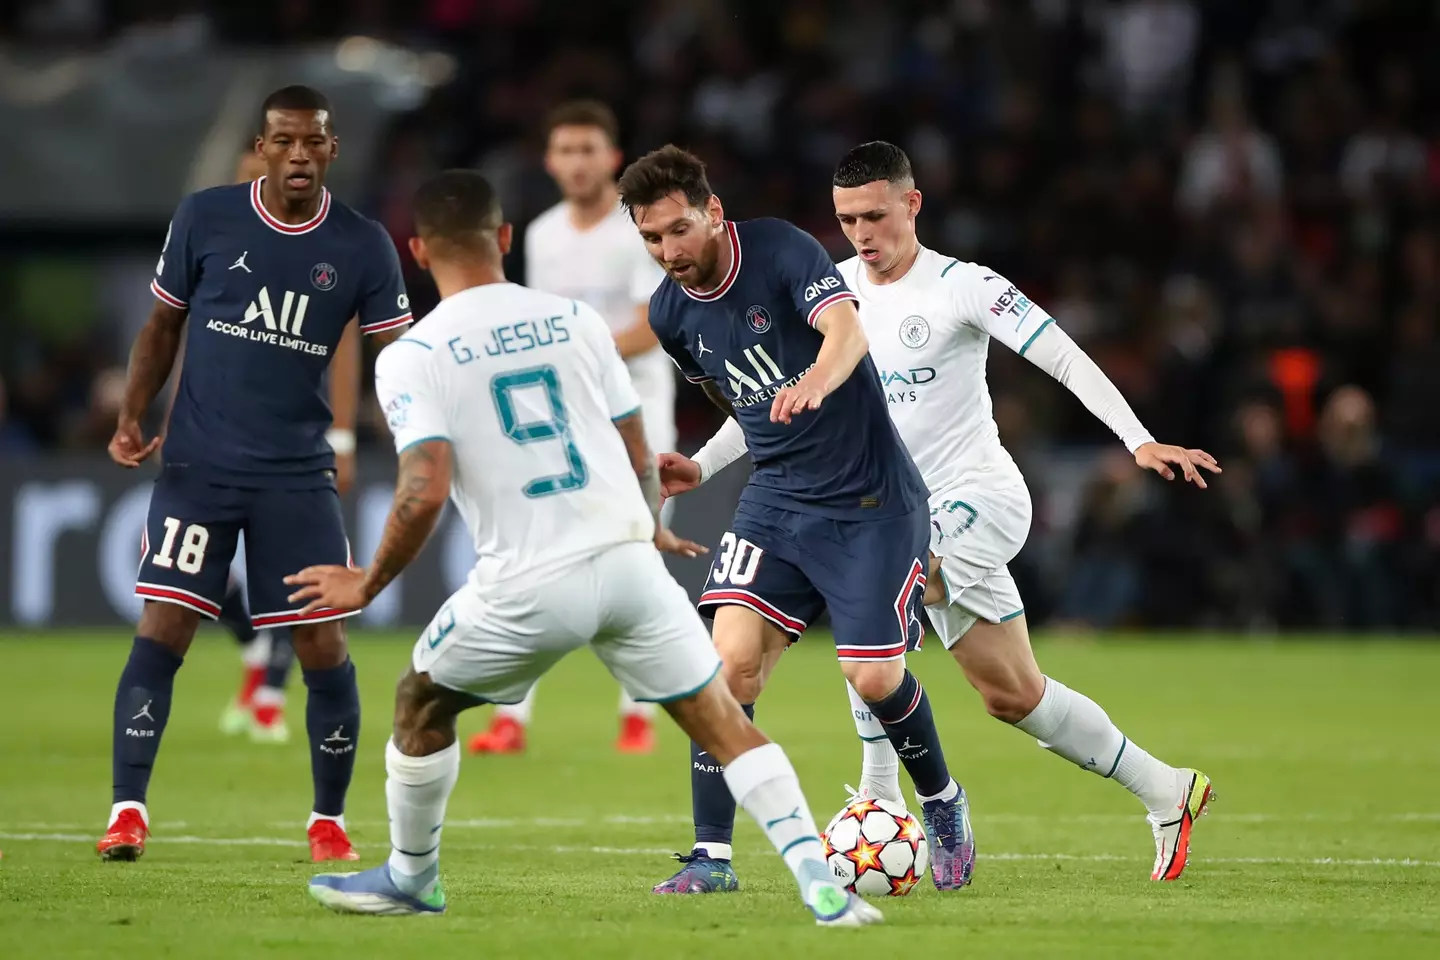 Foden playing against Messi in a Champions League game in 2021. (Image